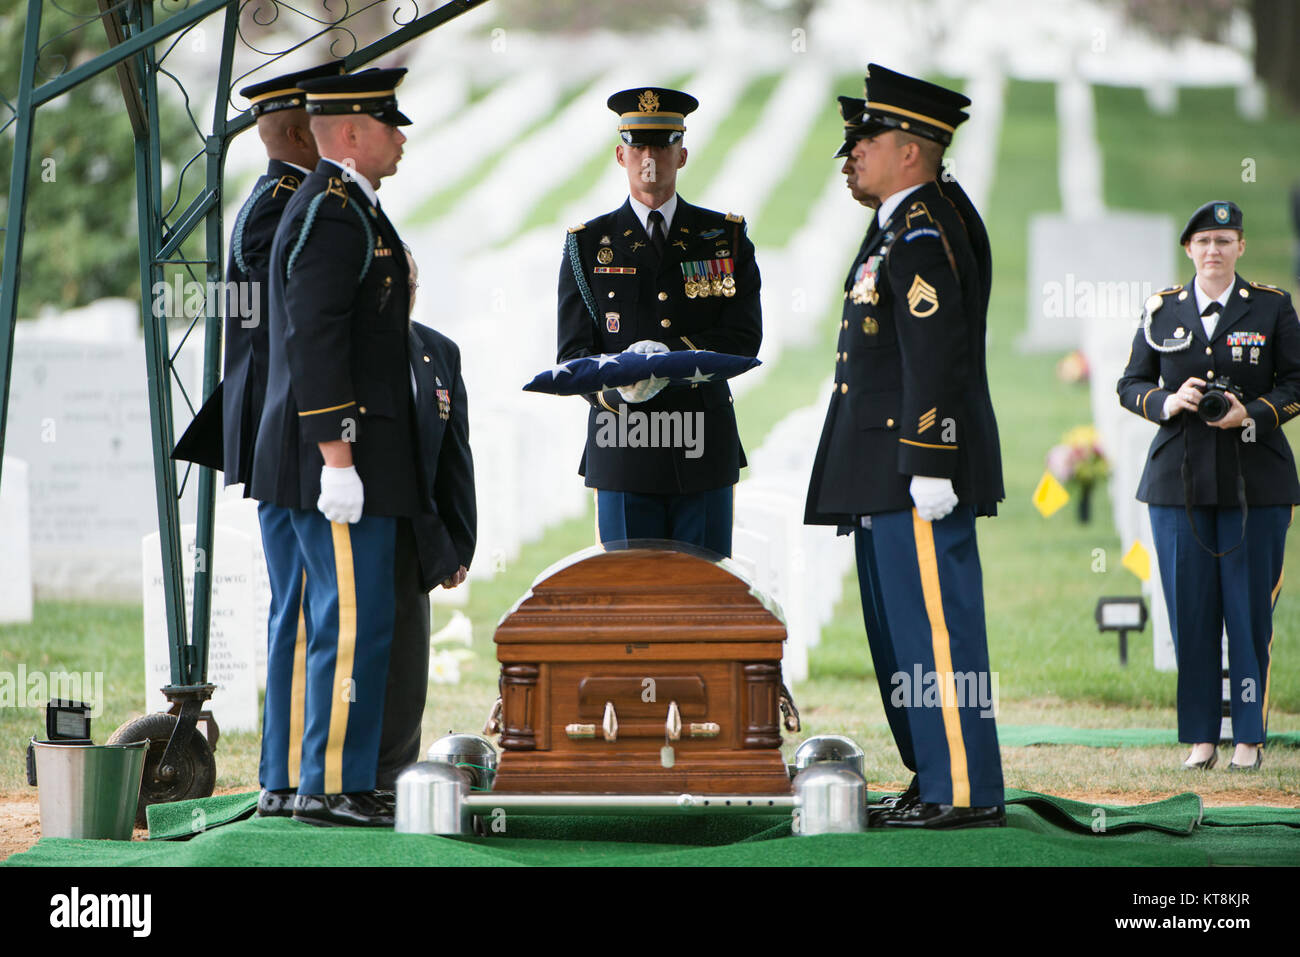 Members of the 3d U.S. Infantry Regiment (The Old Guard) participate in the graveside service for U.S. Army Air Forces 2nd Lt. Marvin B. Rothman, 21, of Cleveland Heights, Ohio, at Arlington National Cemetery, April 19, 2017, in Arlington, Va. Rothman went missing during a bombing escort mission, April 11, 1944, flying a P-47D Thunderbolt over New Guinea. His remains were recently found and identified. (U.S. Army photo by Rachel Larue/Arlington National Cemetery/released) Stock Photo